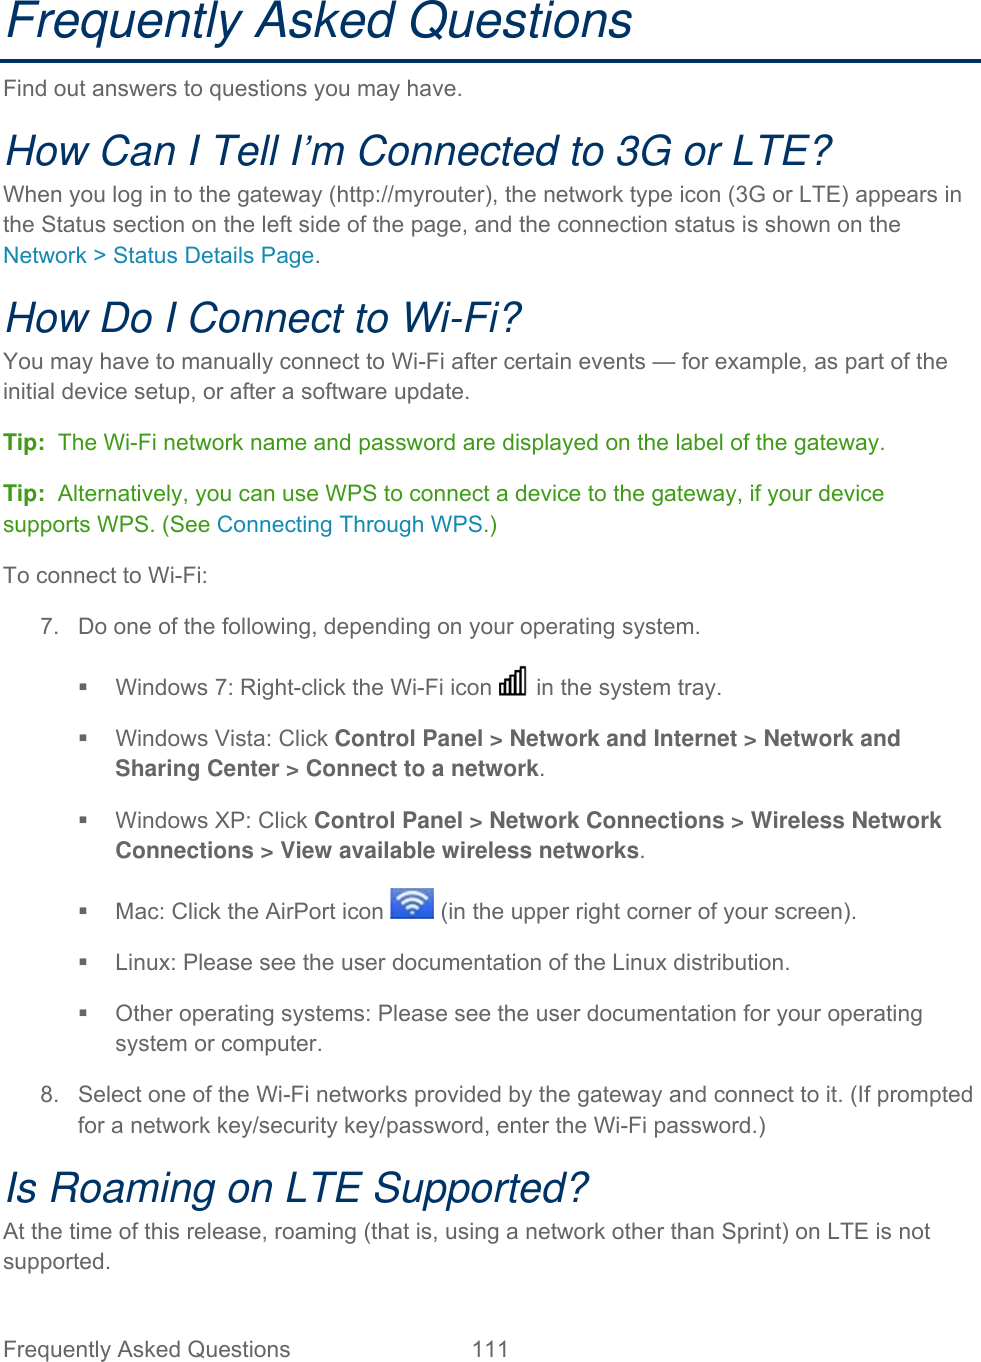 Frequently Asked Questions  111   Frequently Asked Questions Find out answers to questions you may have. How Can I Tell I’m Connected to 3G or LTE? When you log in to the gateway (http://myrouter), the network type icon (3G or LTE) appears in the Status section on the left side of the page, and the connection status is shown on the Network &gt; Status Details Page. How Do I Connect to Wi-Fi? You may have to manually connect to Wi-Fi after certain events — for example, as part of the initial device setup, or after a software update. Tip:  The Wi-Fi network name and password are displayed on the label of the gateway.  Tip:  Alternatively, you can use WPS to connect a device to the gateway, if your device supports WPS. (See Connecting Through WPS.) To connect to Wi-Fi: 7.  Do one of the following, depending on your operating system.   Windows 7: Right-click the Wi-Fi icon   in the system tray.   Windows Vista: Click Control Panel &gt; Network and Internet &gt; Network and Sharing Center &gt; Connect to a network.   Windows XP: Click Control Panel &gt; Network Connections &gt; Wireless Network Connections &gt; View available wireless networks.   Mac: Click the AirPort icon   (in the upper right corner of your screen).   Linux: Please see the user documentation of the Linux distribution.   Other operating systems: Please see the user documentation for your operating system or computer. 8.  Select one of the Wi-Fi networks provided by the gateway and connect to it. (If prompted for a network key/security key/password, enter the Wi-Fi password.) Is Roaming on LTE Supported? At the time of this release, roaming (that is, using a network other than Sprint) on LTE is not supported. 